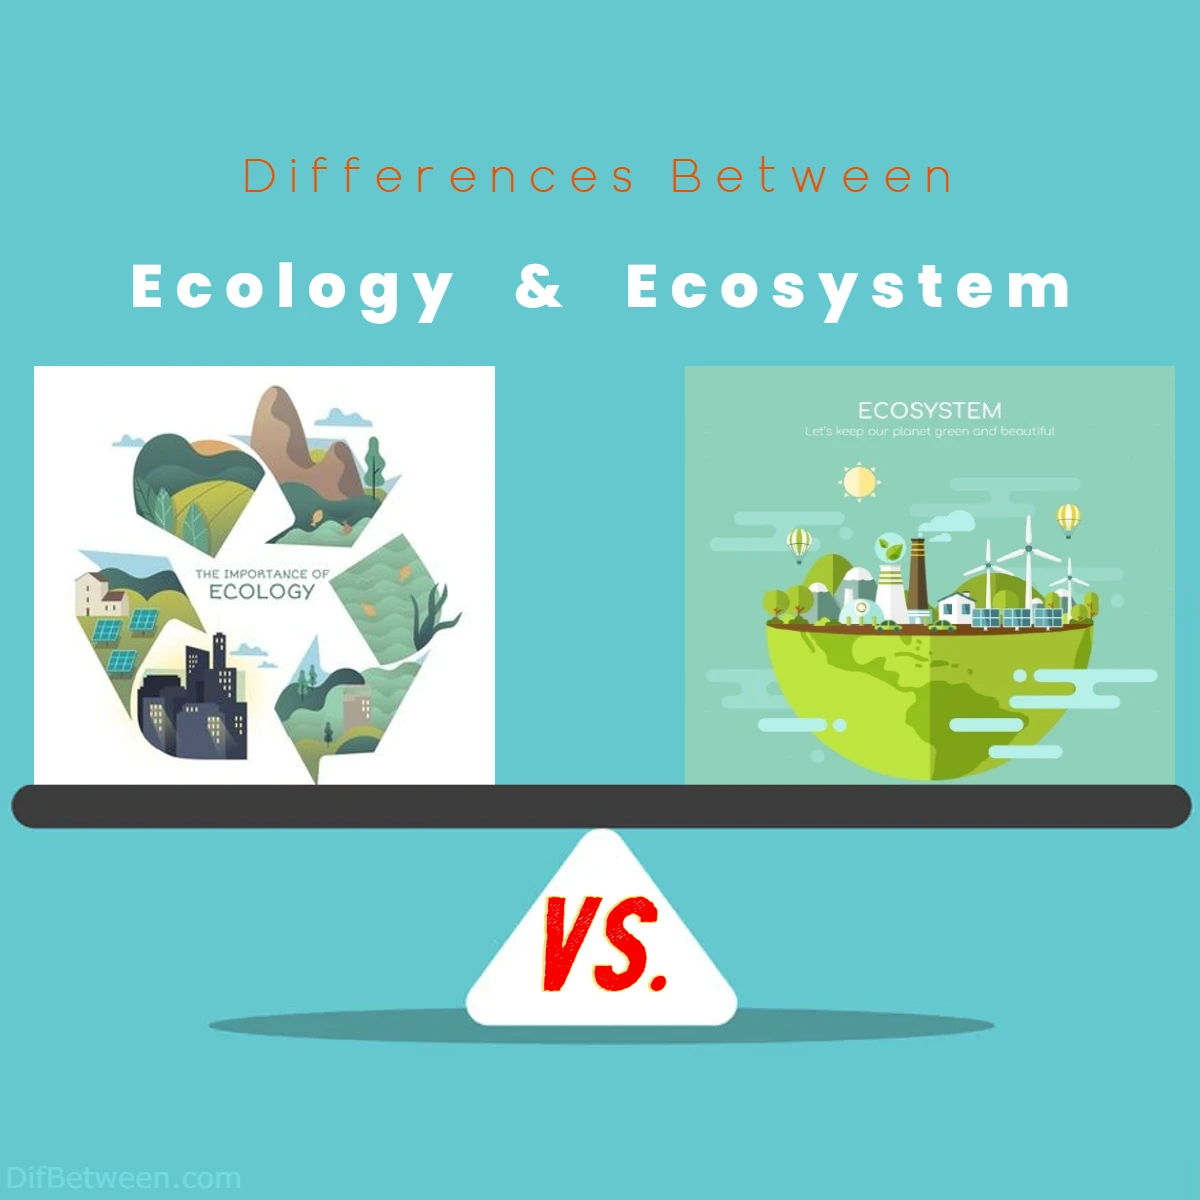 Differences Between Ecology vs Ecosystem